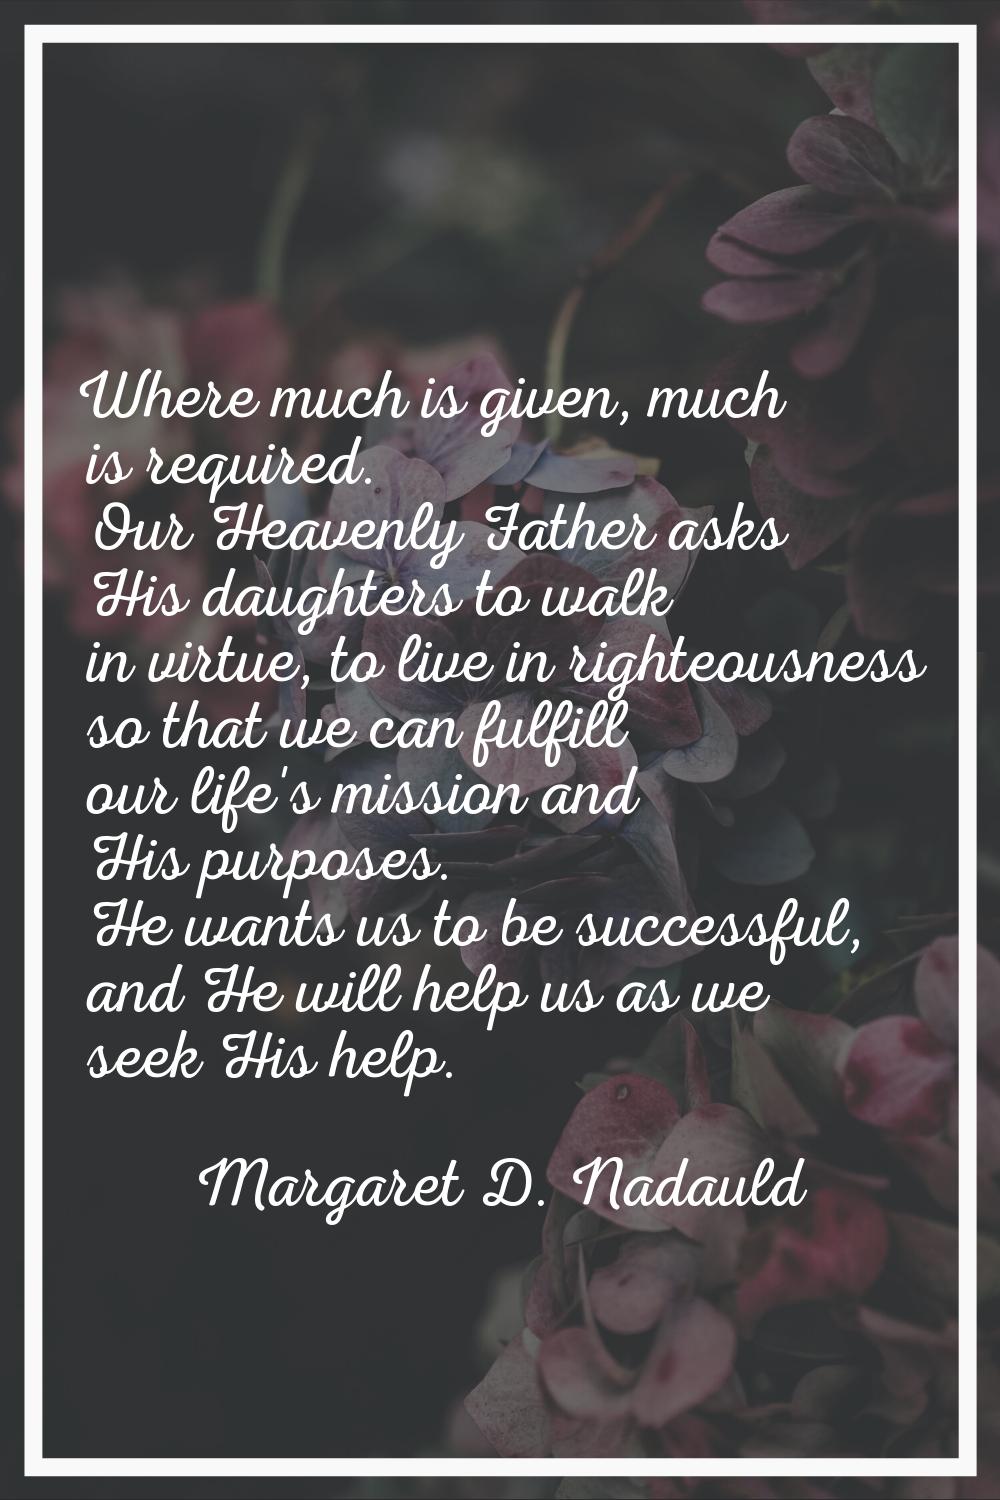 Where much is given, much is required. Our Heavenly Father asks His daughters to walk in virtue, to